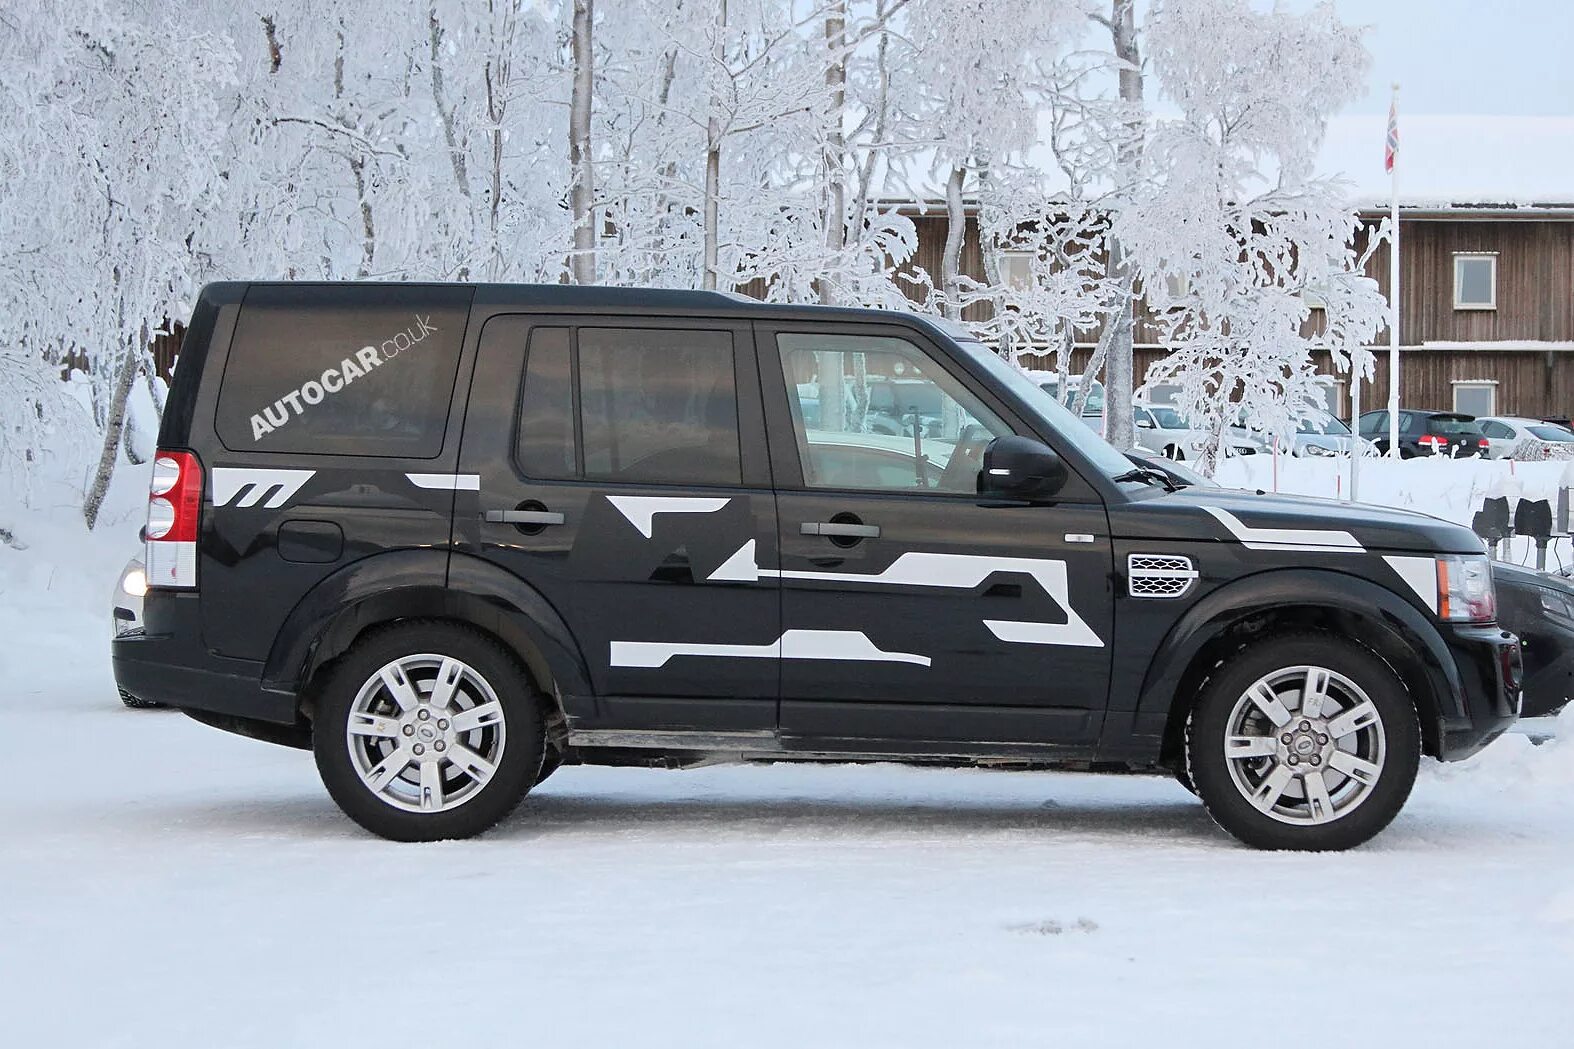 Тест дискавери. Land Rover Discovery 3. Land Rover Discovery 3 в камуфляже. Land Rover Discovery 3 новый. Оклейка Discovery 4.